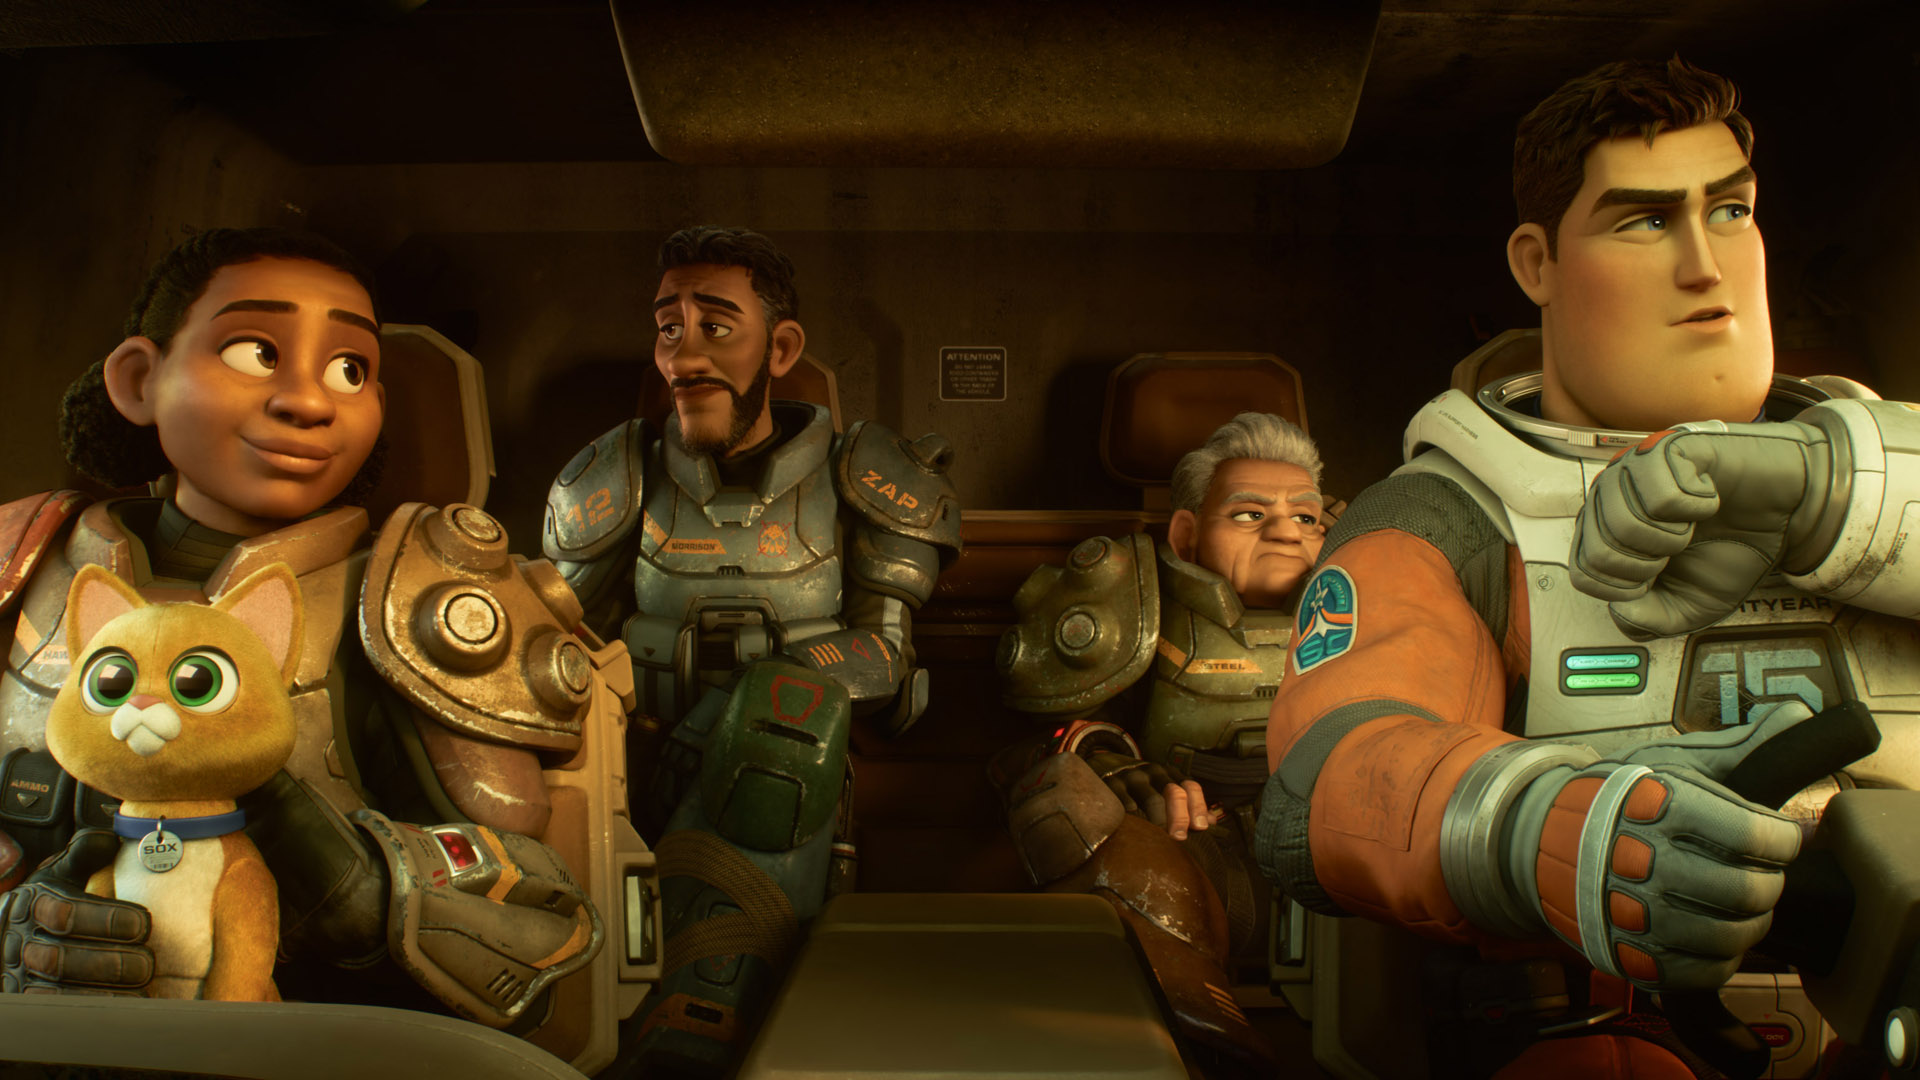 Buzz and his new crew head out to find a new ship in Pixar's Lightyear movie